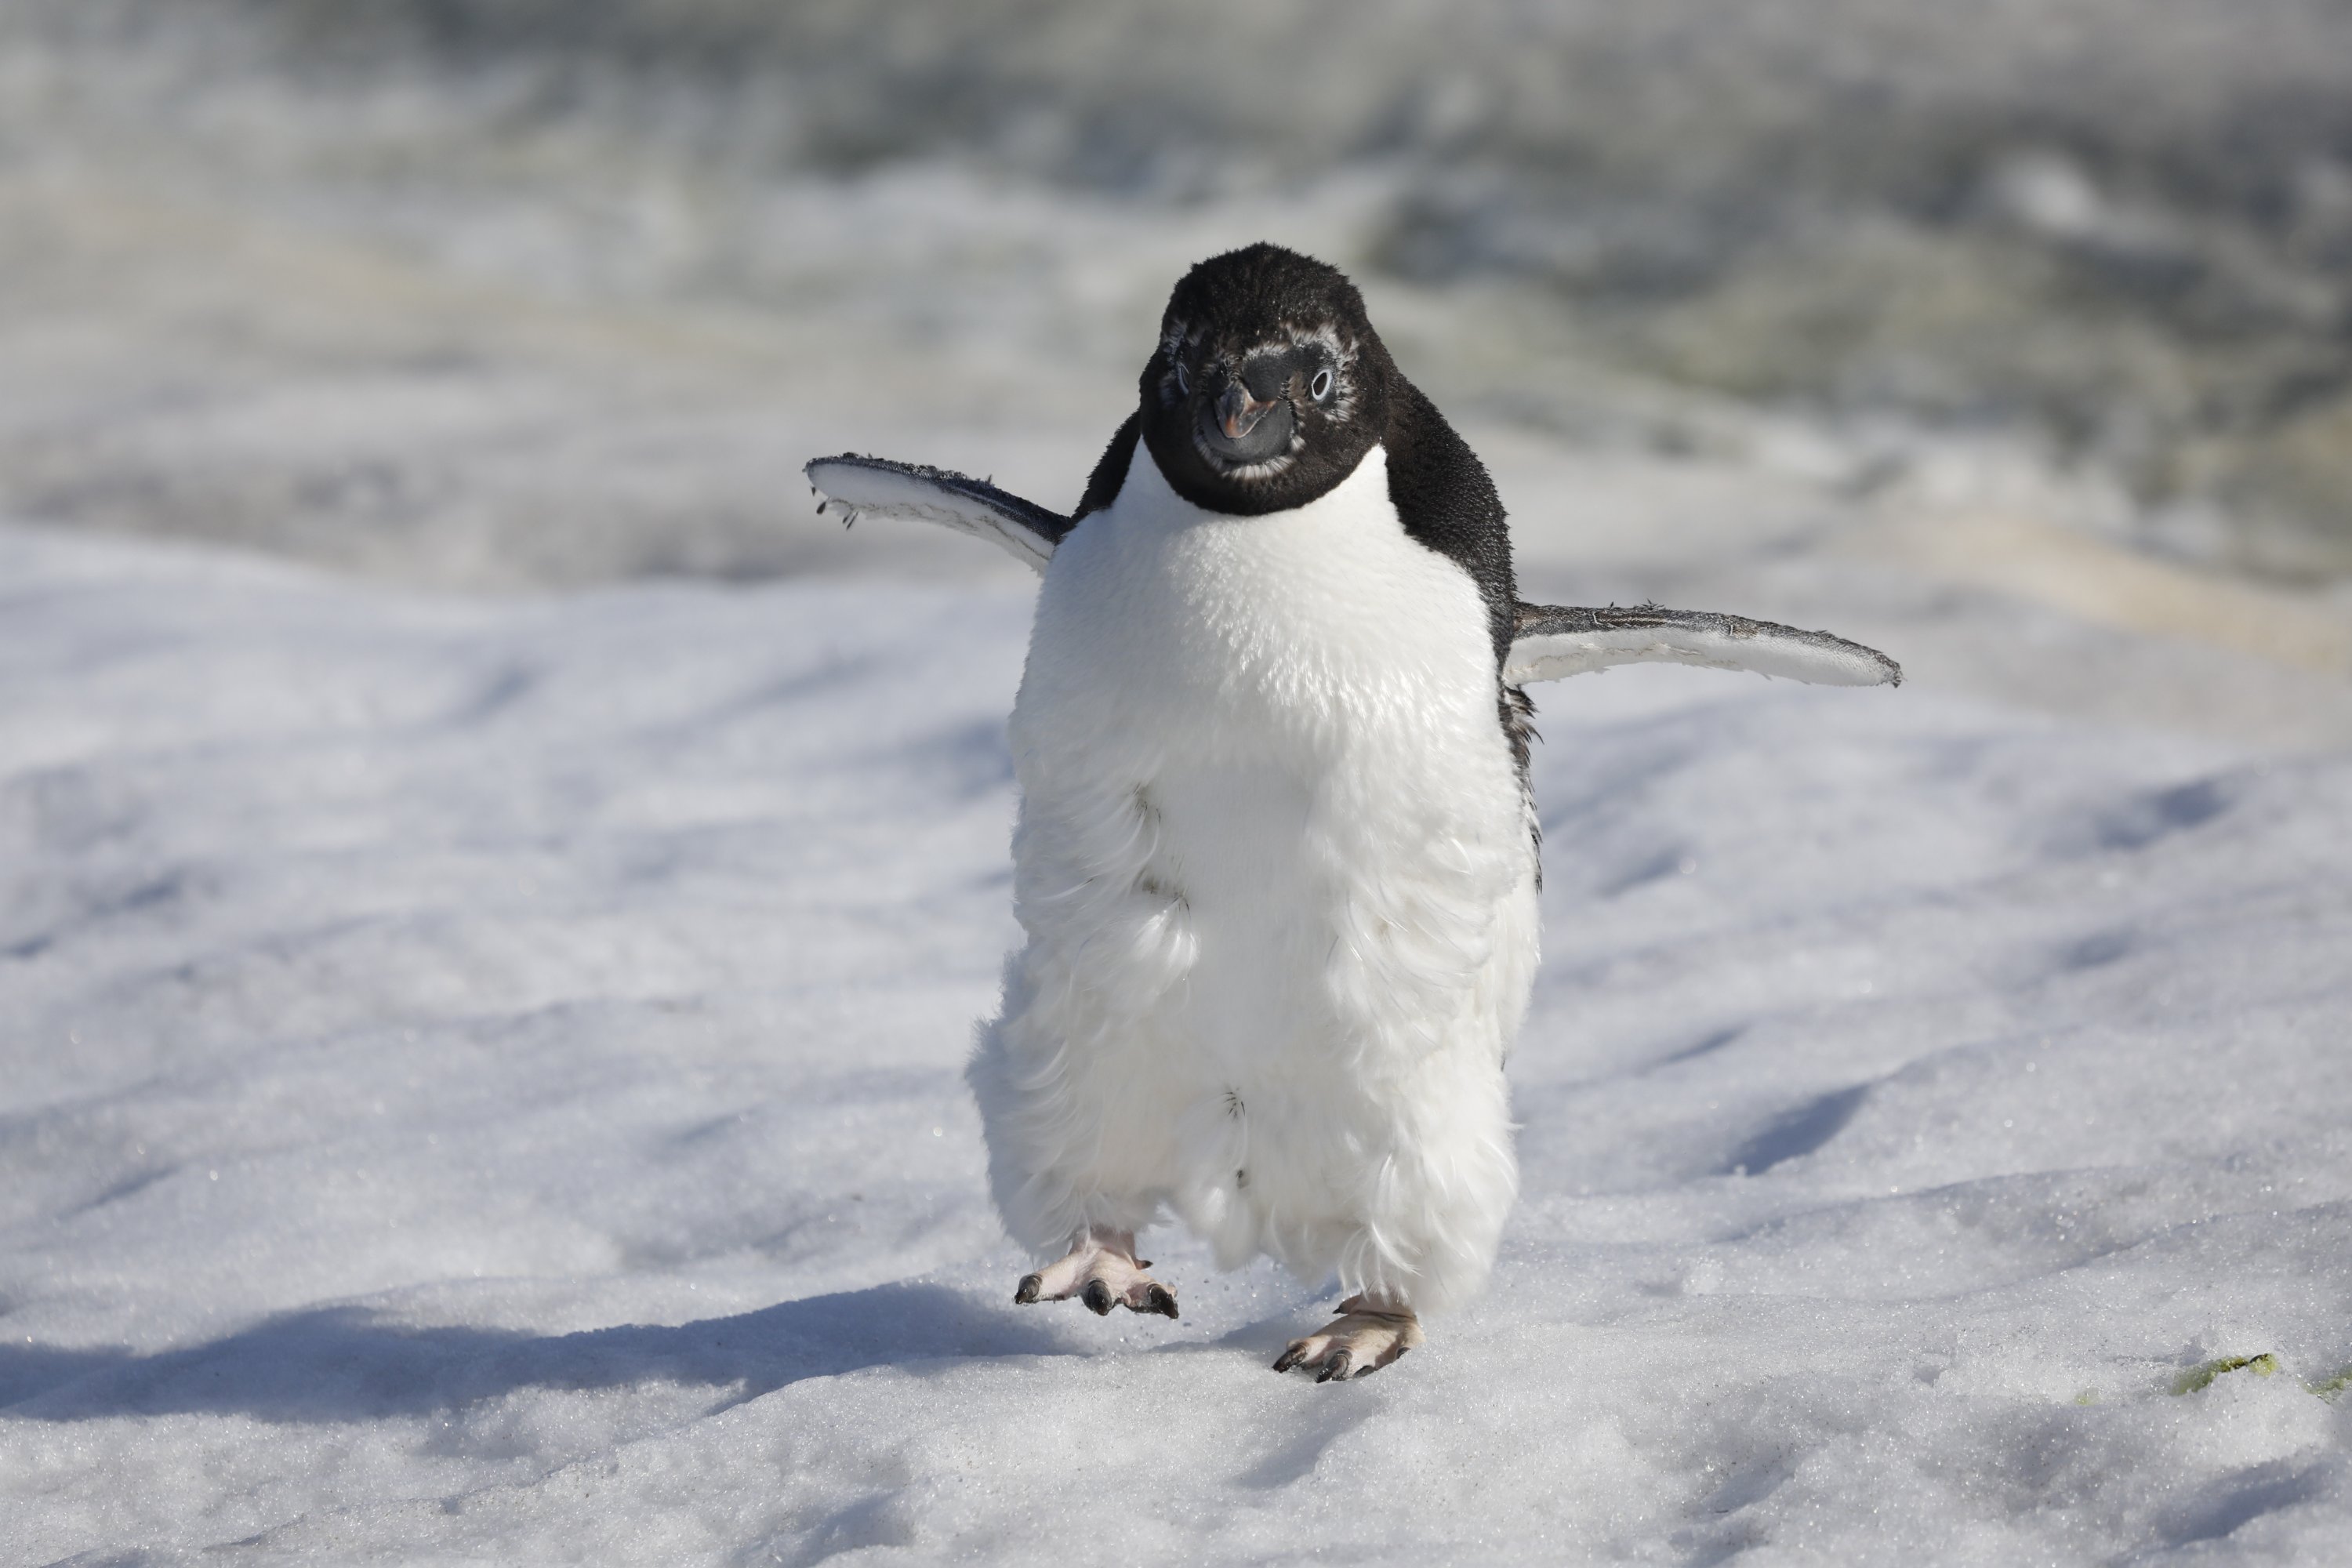 Penguins will do everything they can – waddle, hop or slide – to get their food. (Photo by Hayrettin Bektaş)